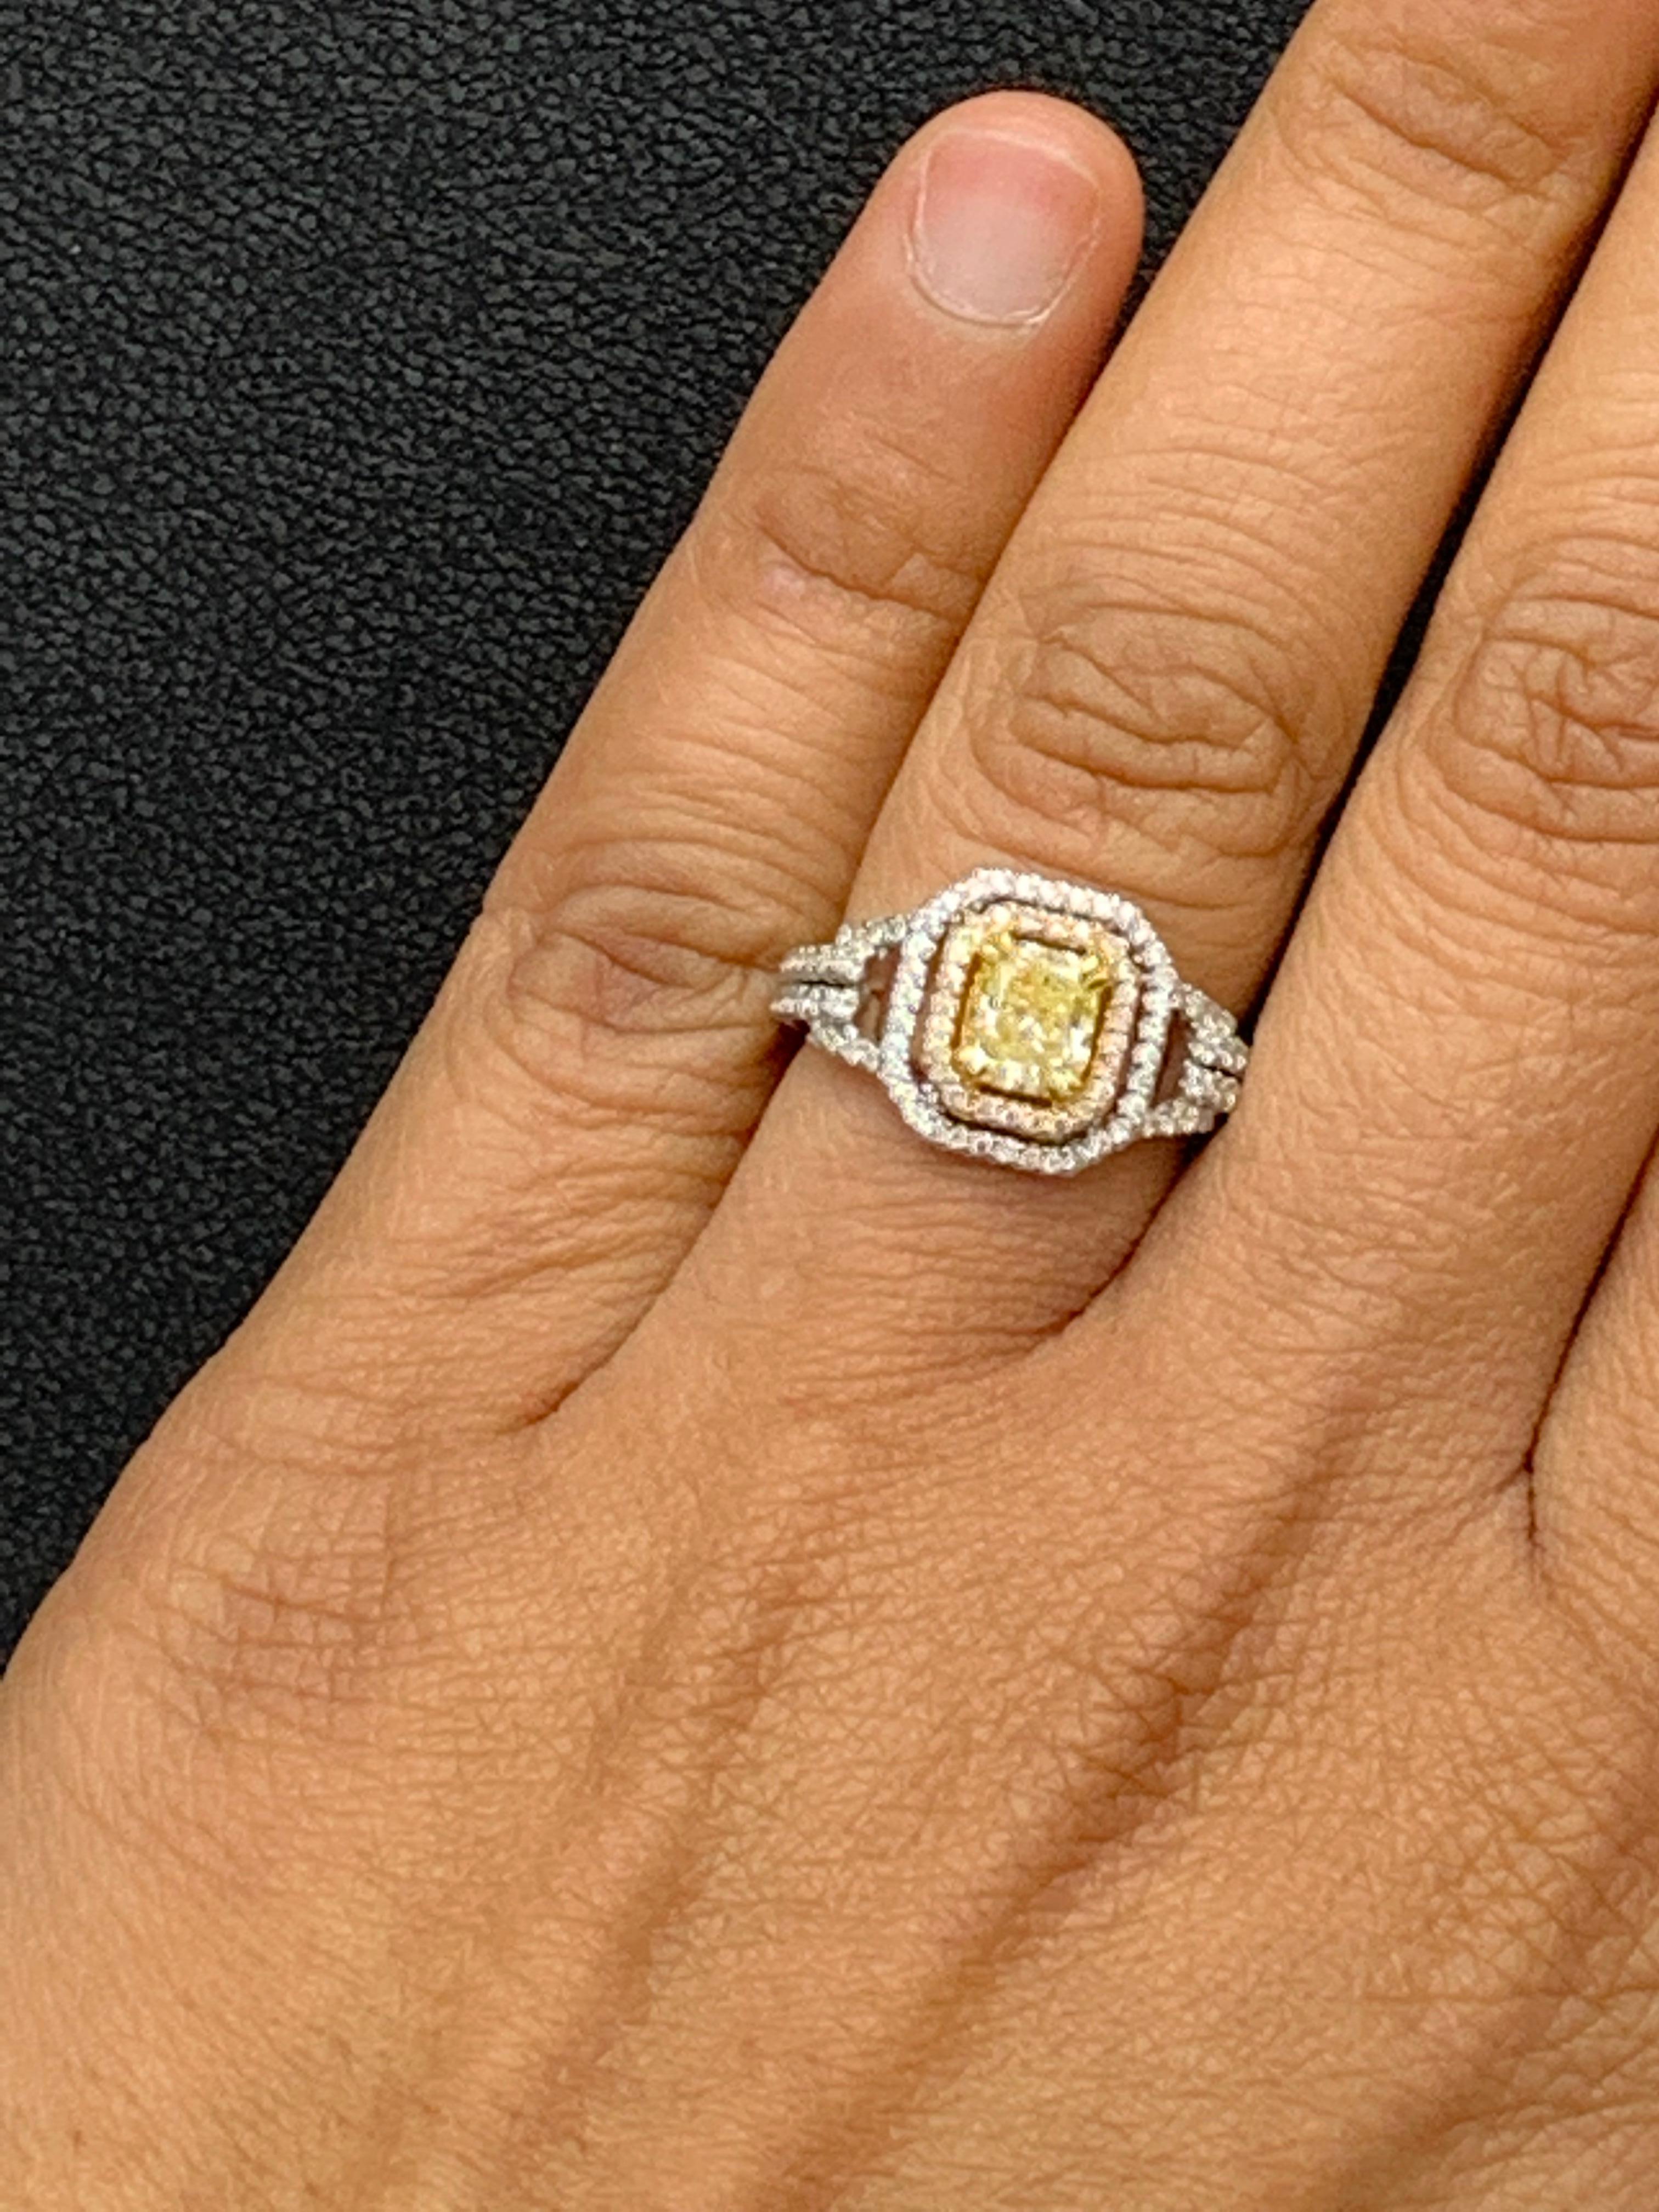 1 Carat Emerald Cut Yellow Diamond Ring in 18k Mix Gold For Sale 1